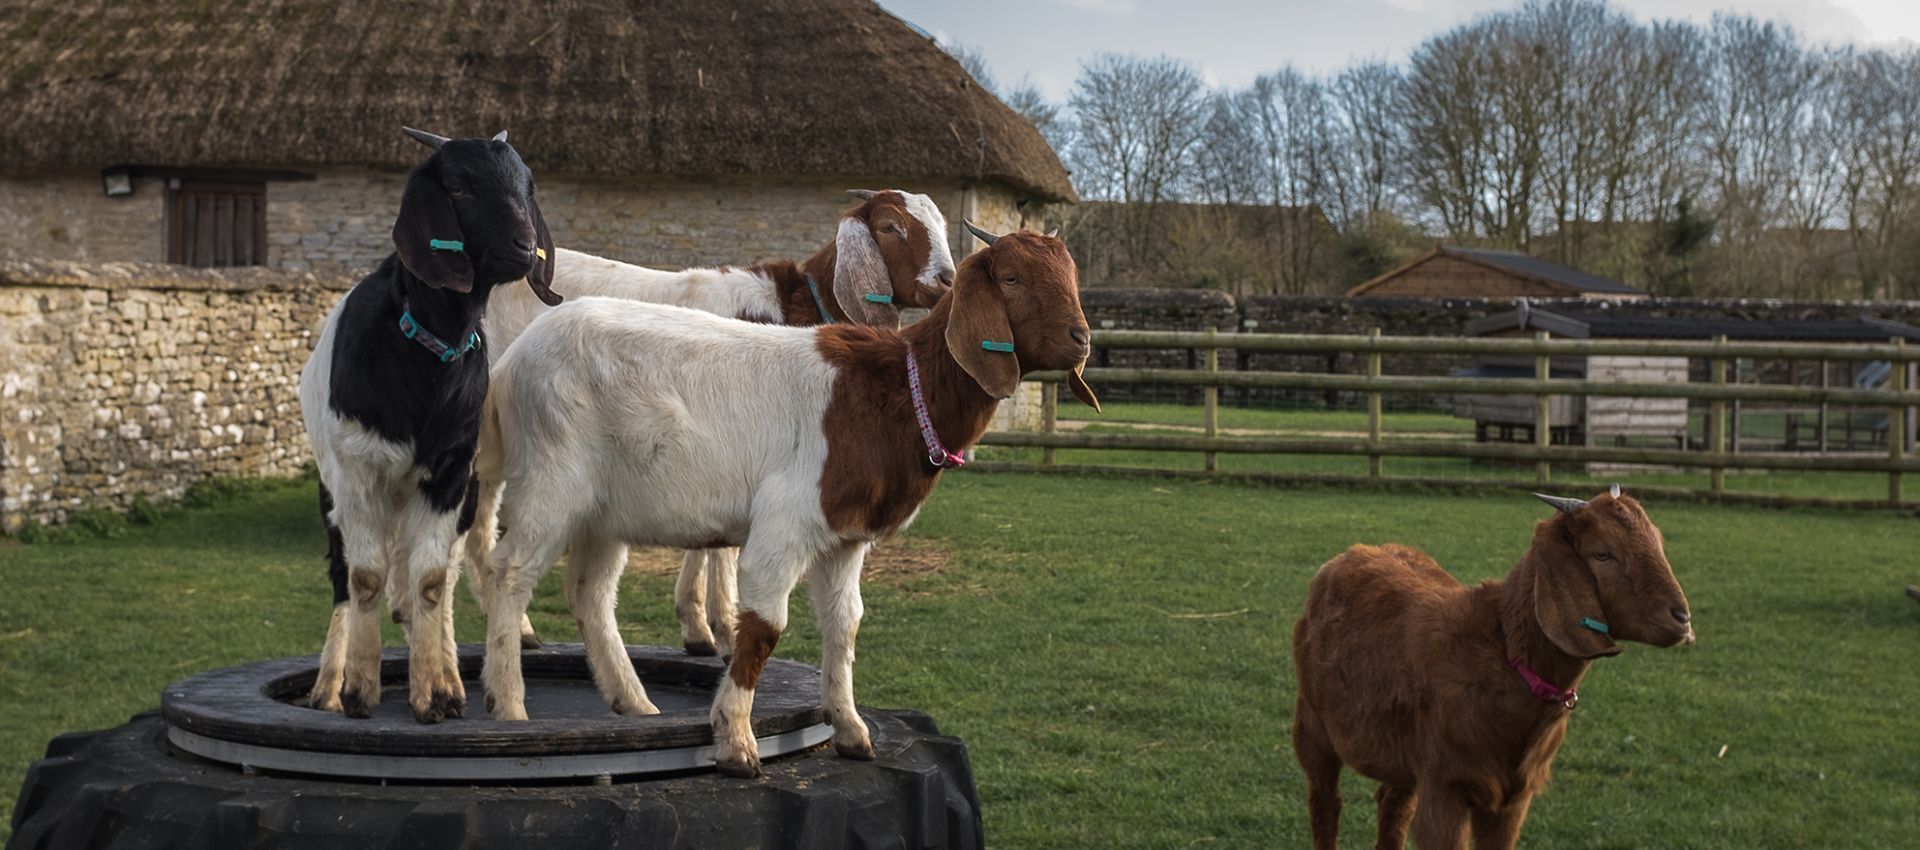 Goats standing on large tyre in field 